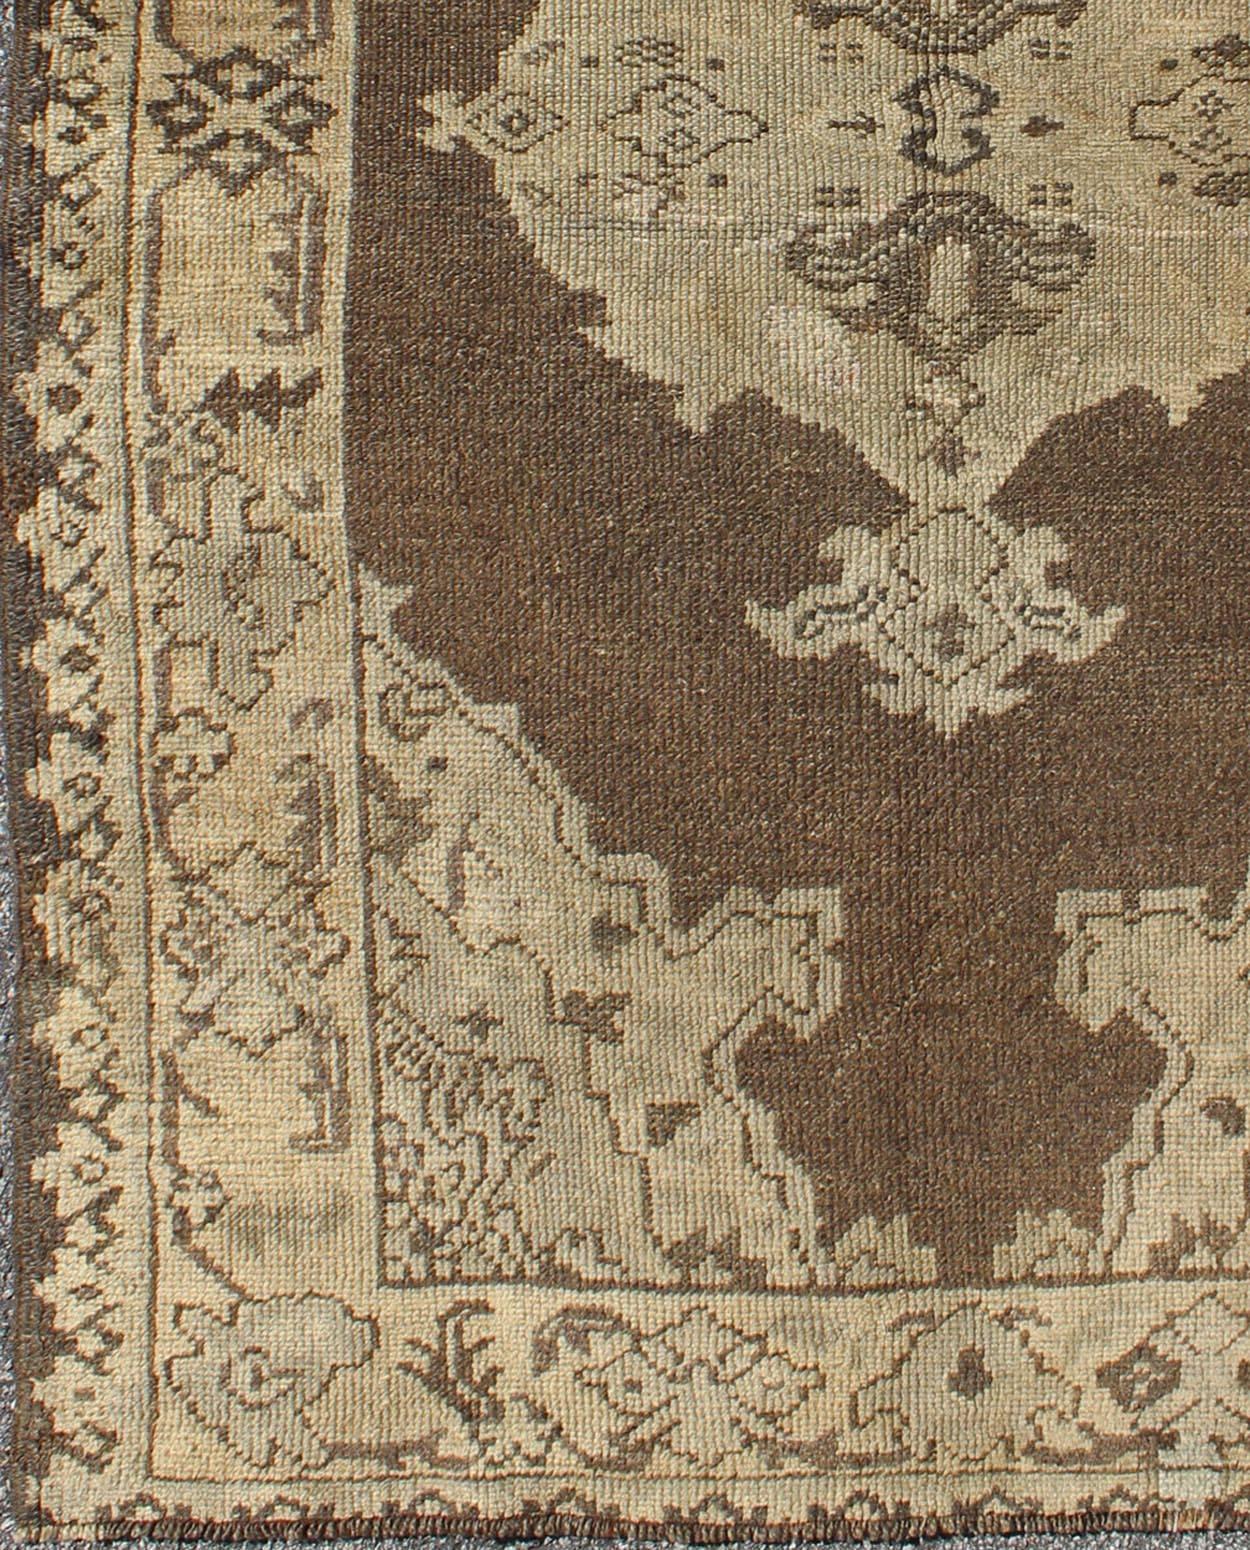 Chocolate background vintage Turkish Oushak rug with floral medallion in cream, rug moz-09, country of origin / type: Turkey / Oushak, circa mid-20th century.

This vintage Turkish Oushak carpet (circa mid-20th century) features a central